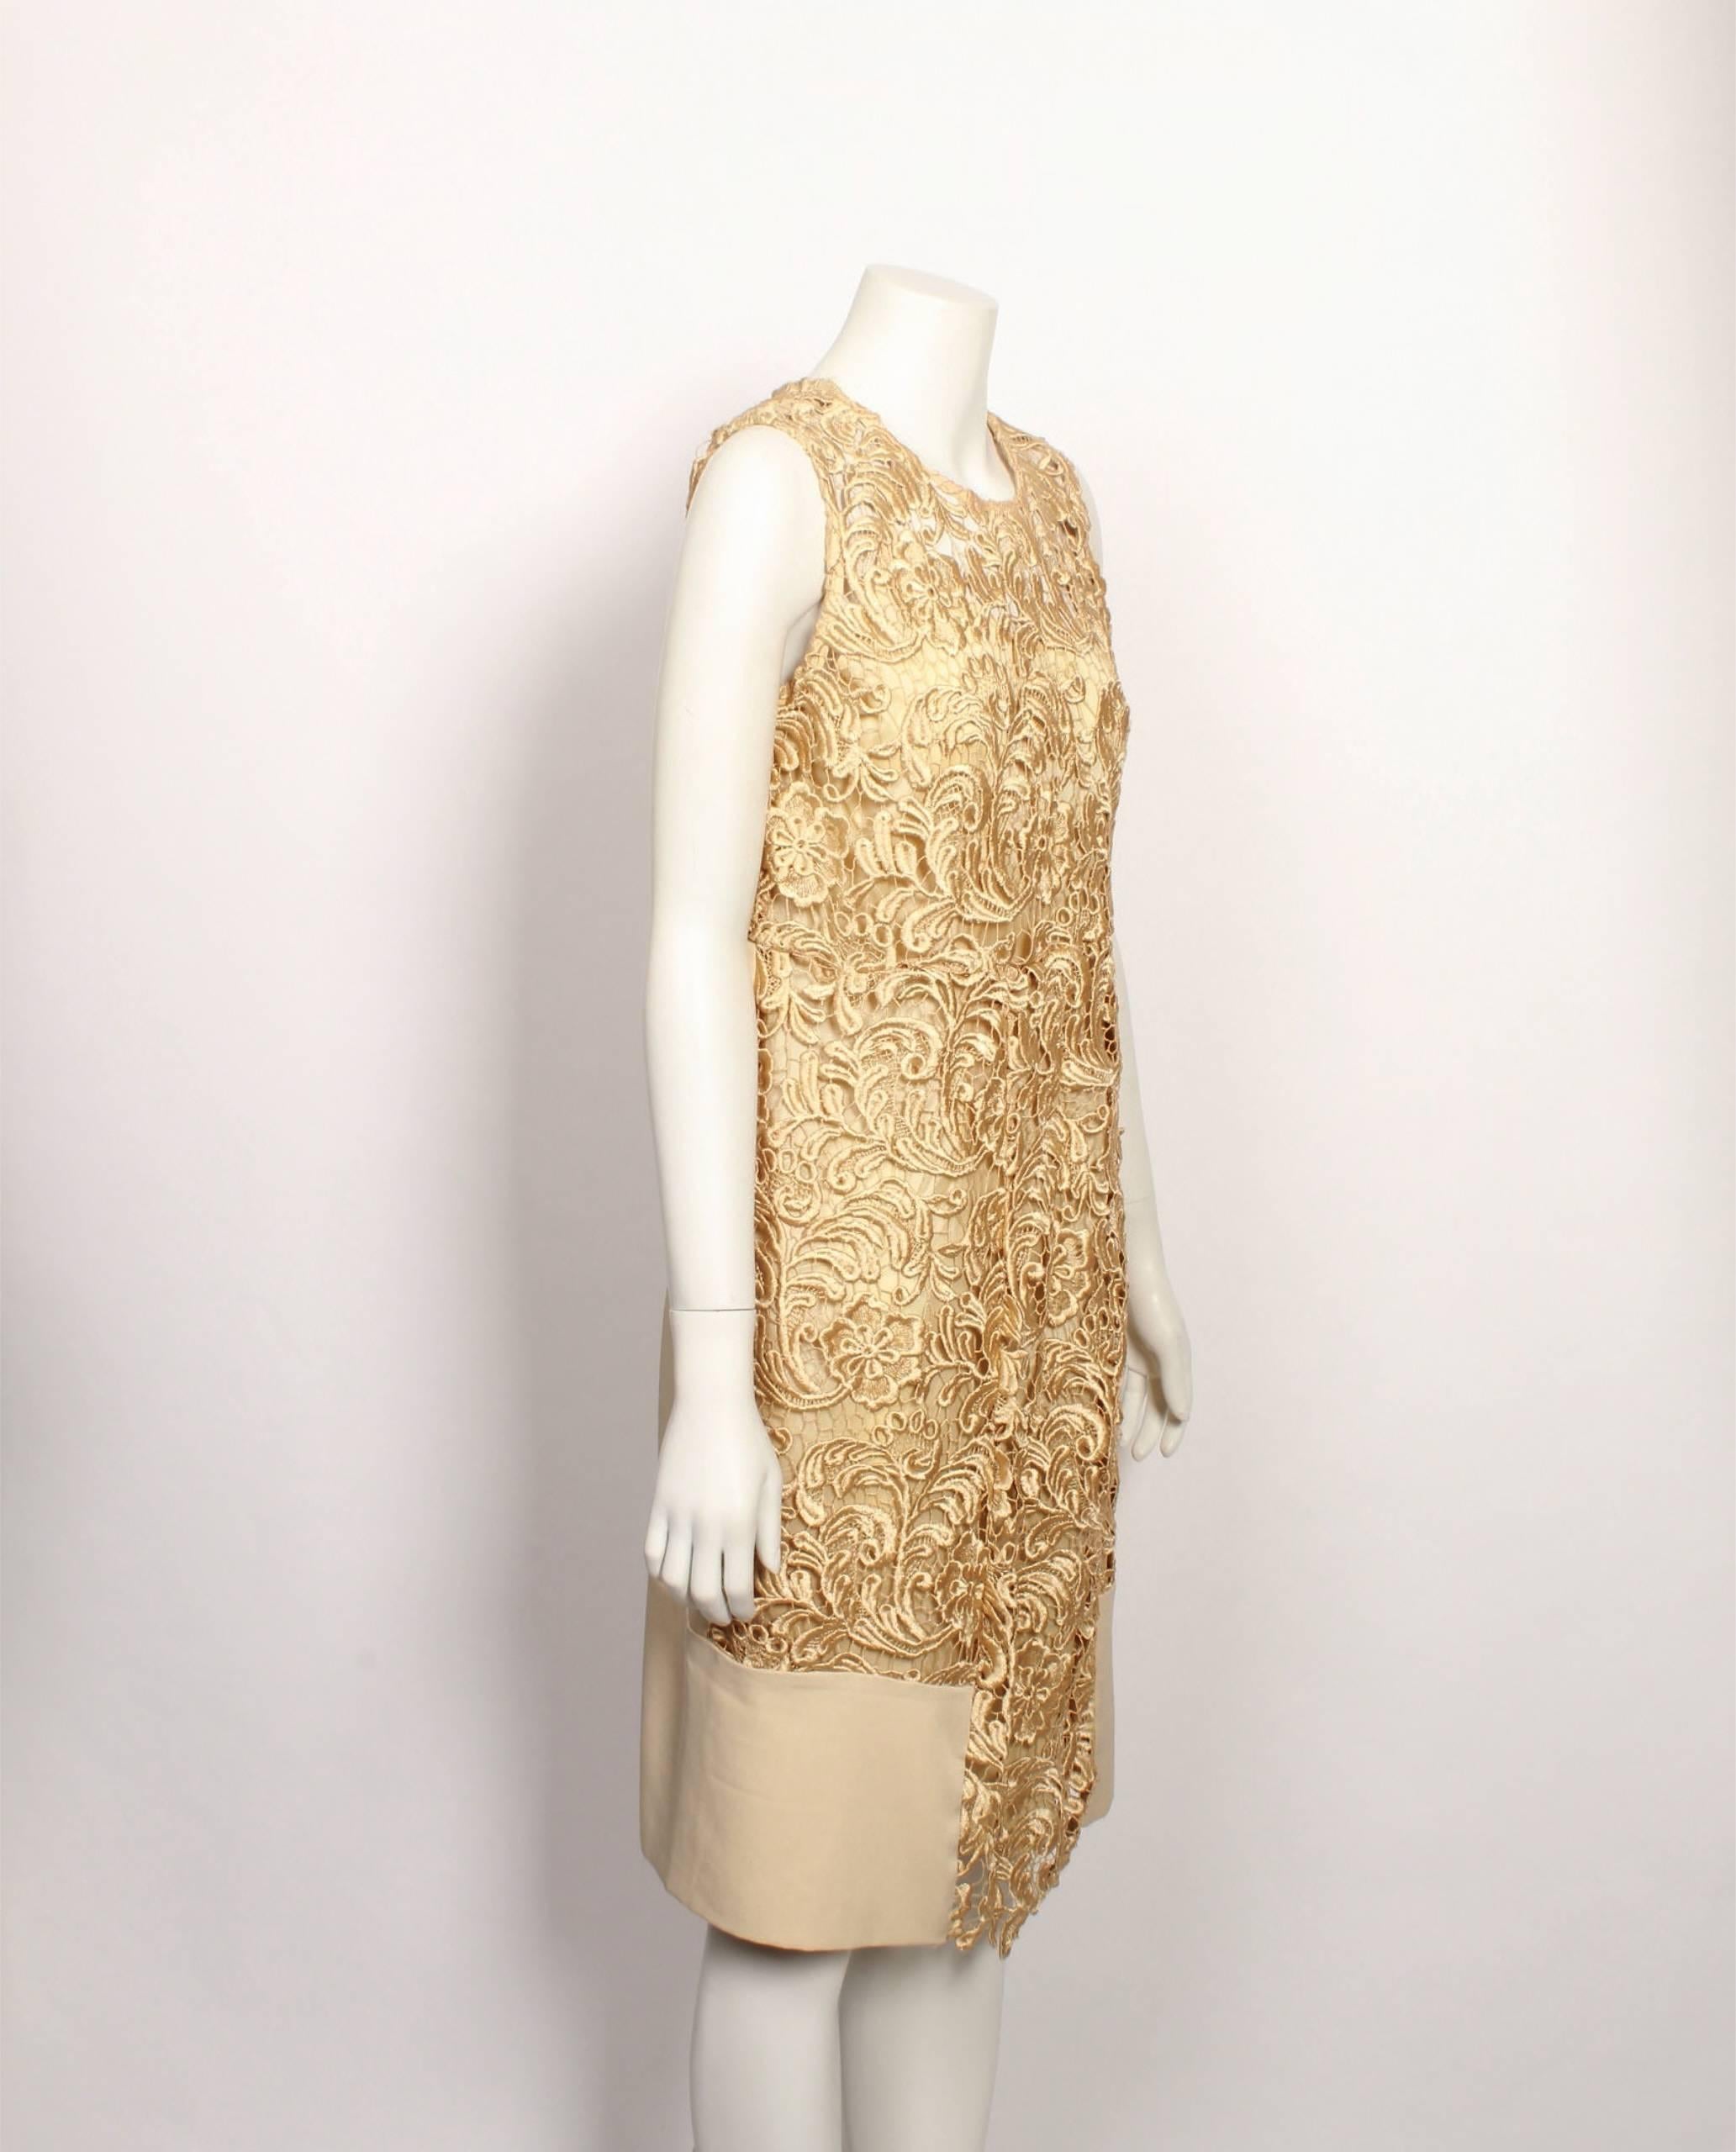 Classic Prada pale gold guipure lace sleeveless shell dress with slip lining and sheer décolletage and back shoulders. Solid fabric panels at front hemline and side back panels. Side zipper fastening. There is some discolouration around the